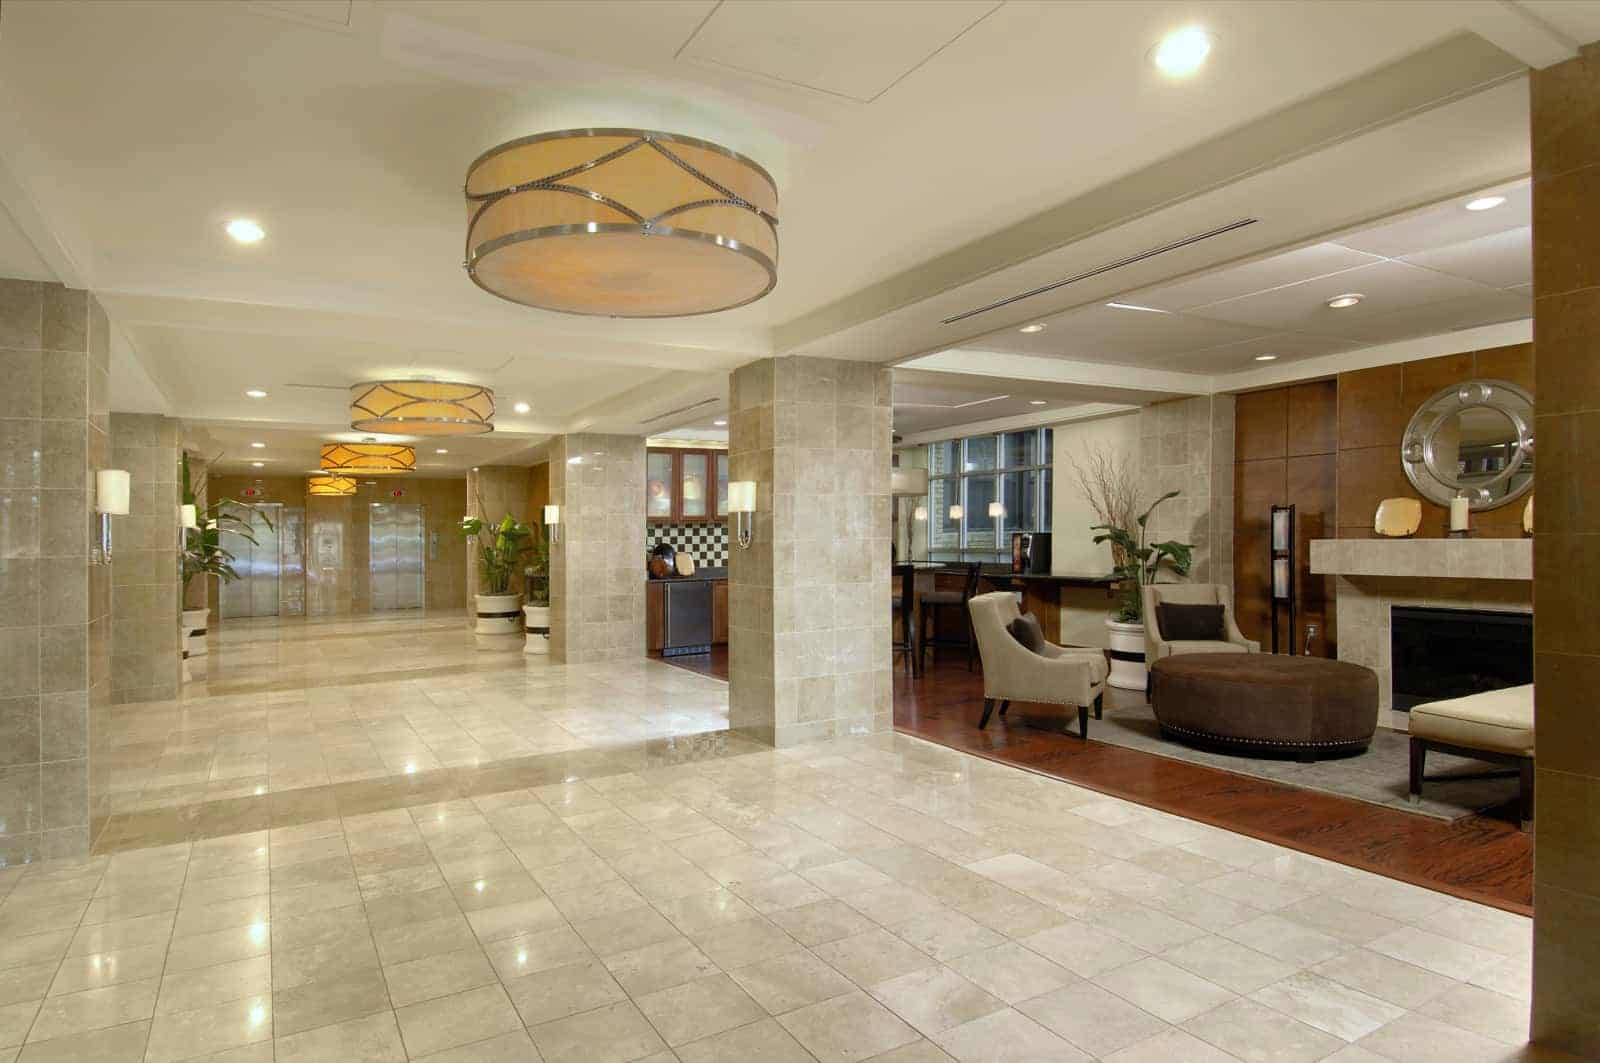 View of the lobby looking toward the elevators.